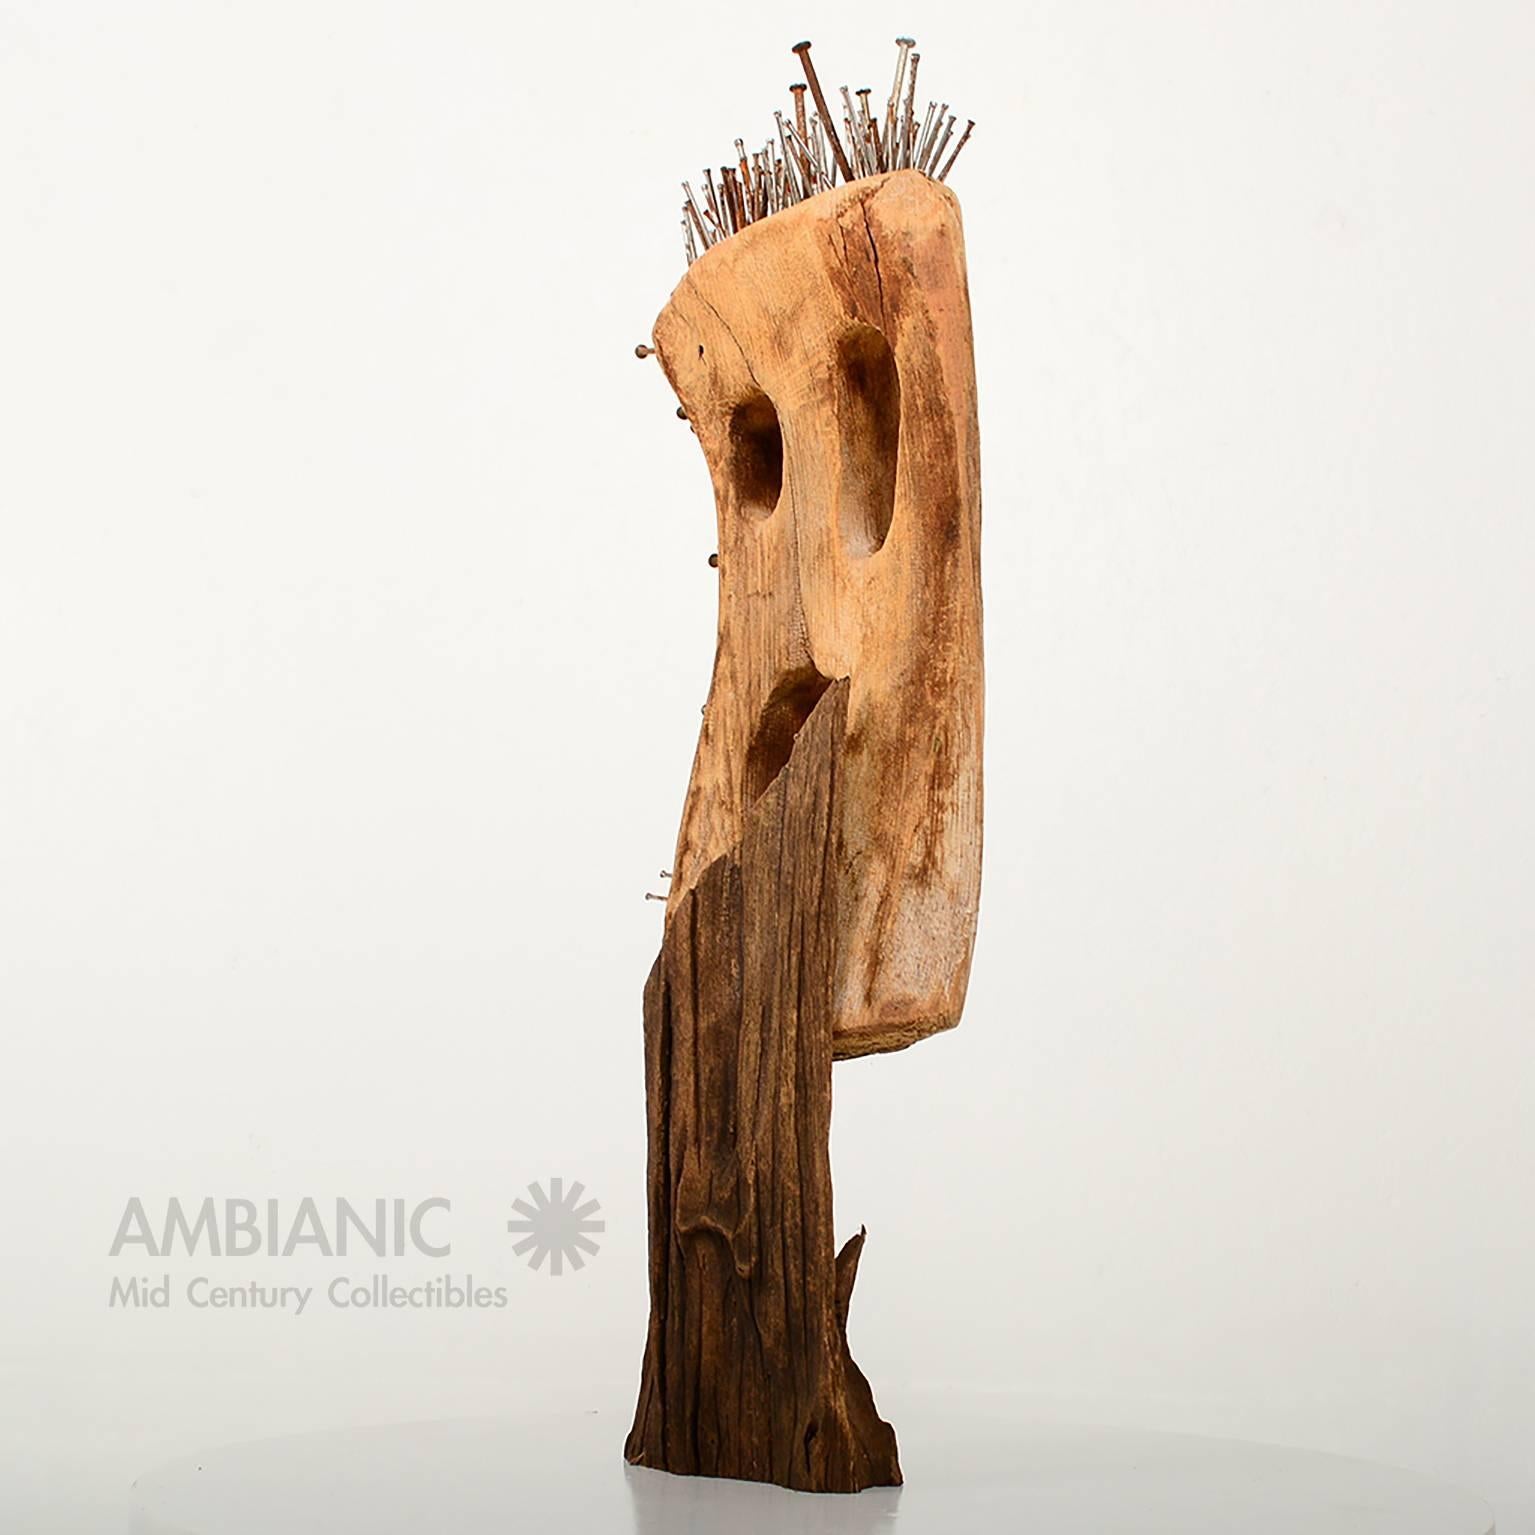 Mid-20th Century Mid Century Modern Abstract Sculpture Mask, Wood and Nails